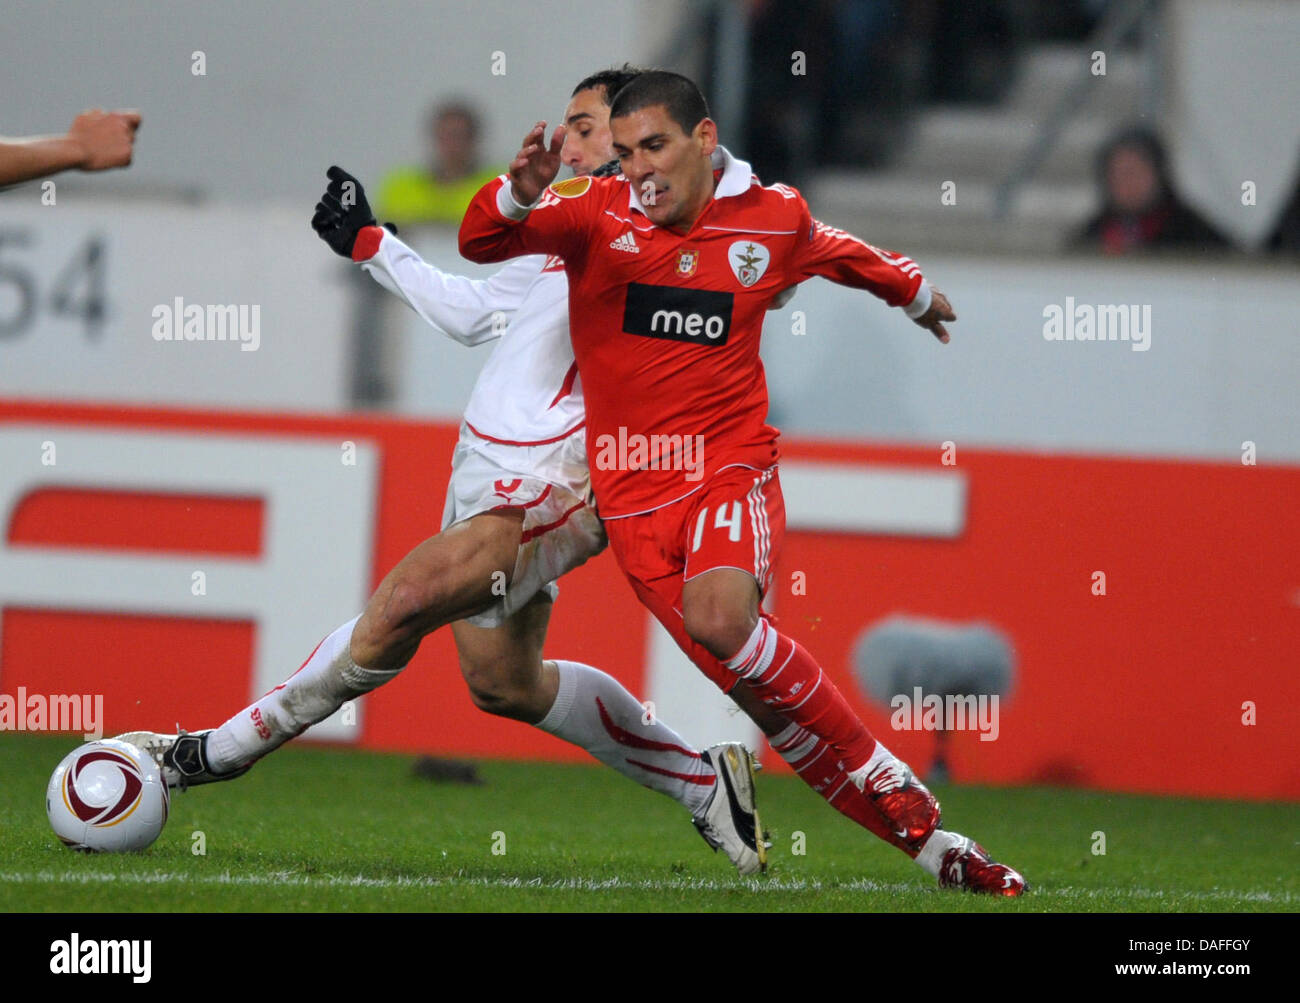 Stuttgart's Cristian Molinaro (L) and Benfica's Maxi Pereira vie for the ball during the UEFA Europa League round of 32 second leg VfB Stuttgart v Benfica Lisbon in Stuttgart 24 February 2011. Benfica won the match with 2-0 and moves up to round of 16 winning 4-1 on aggregate. Photo: Uwe Anspach Stock Photo